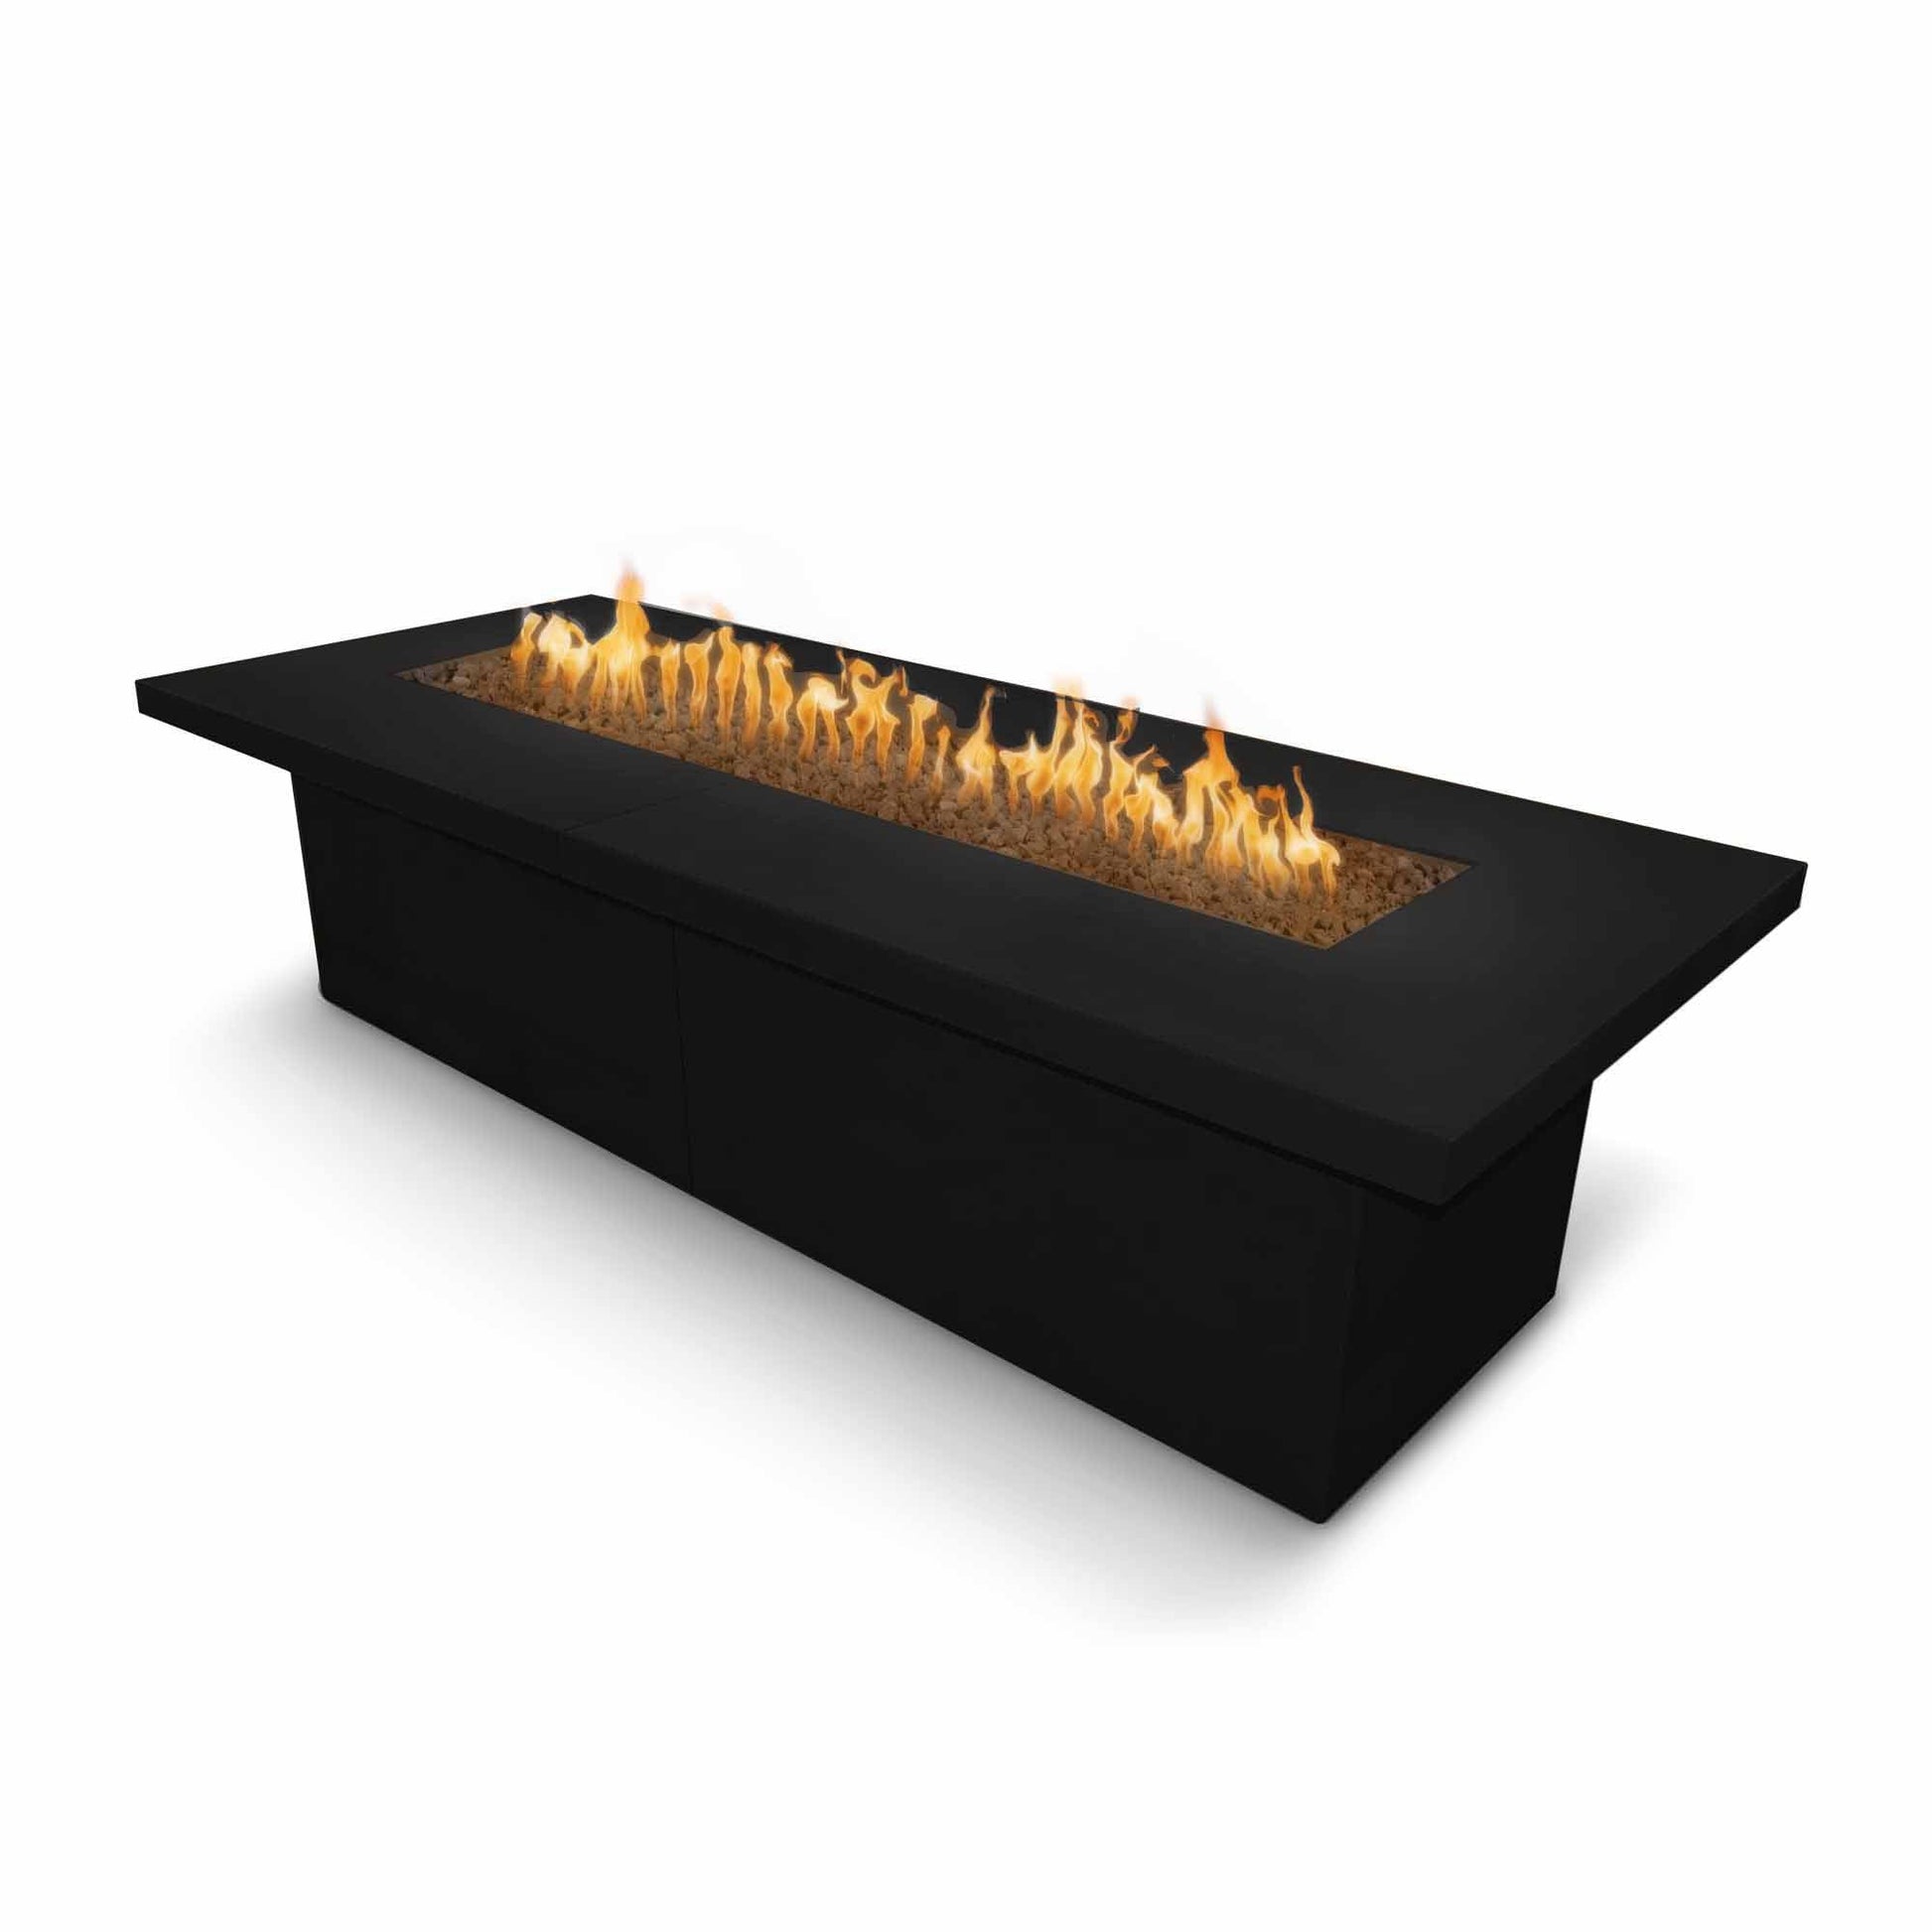 The Outdoor Plus Rectangular Newport 144" White Powder Coated Metal Liquid Propane Fire Pit with Match Lit Ignition